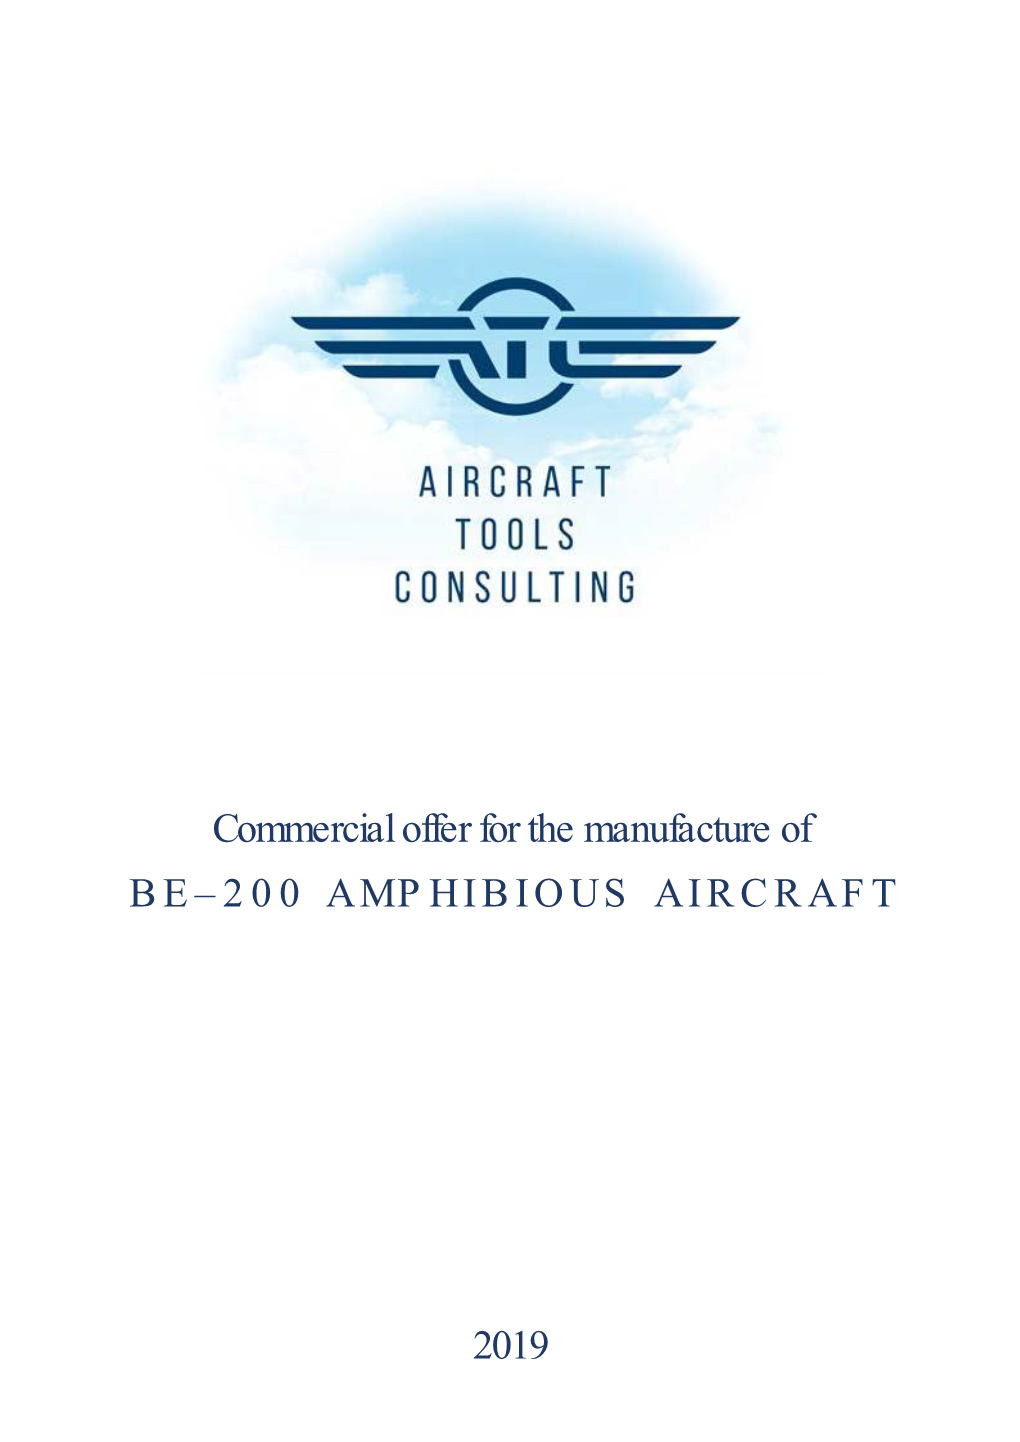 Be-200 Amphibious Aircraft (Commercial Offer).Pdf